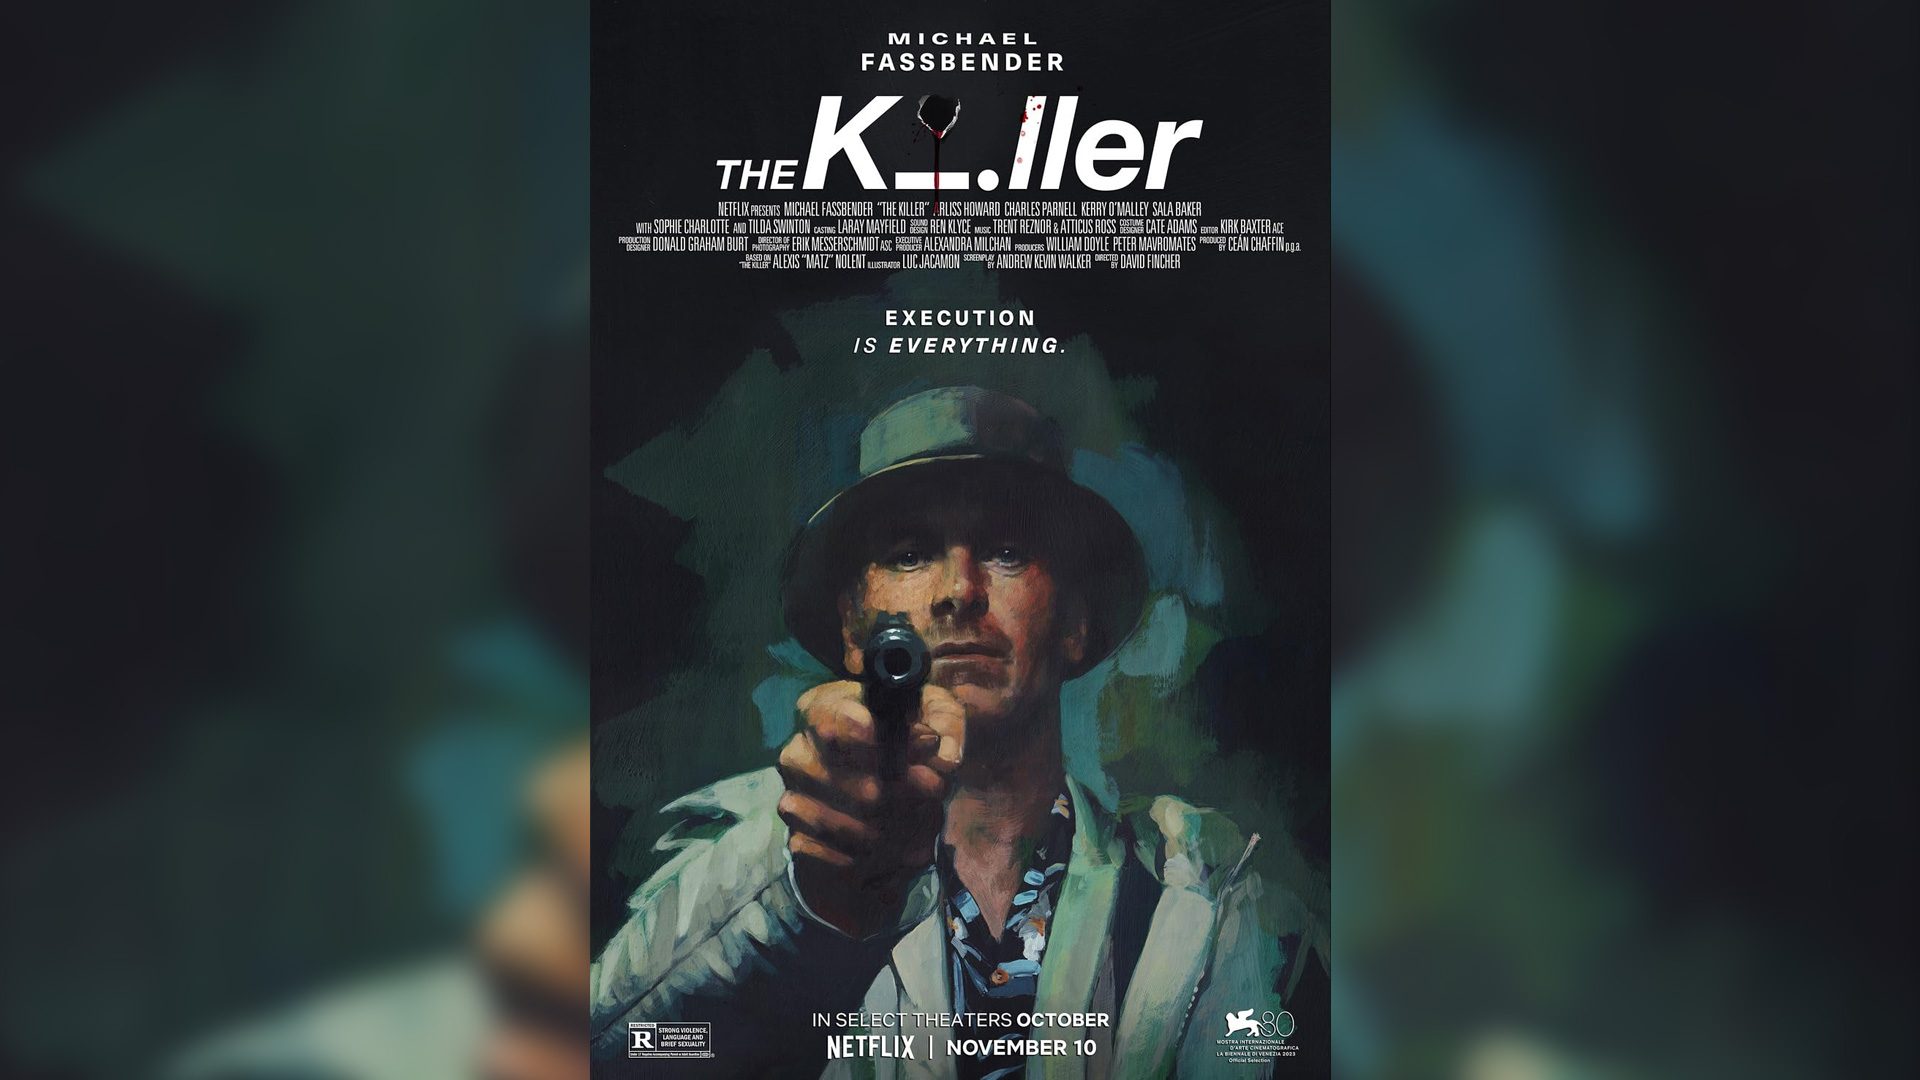 ‘The Killer’ review: When style over substance works